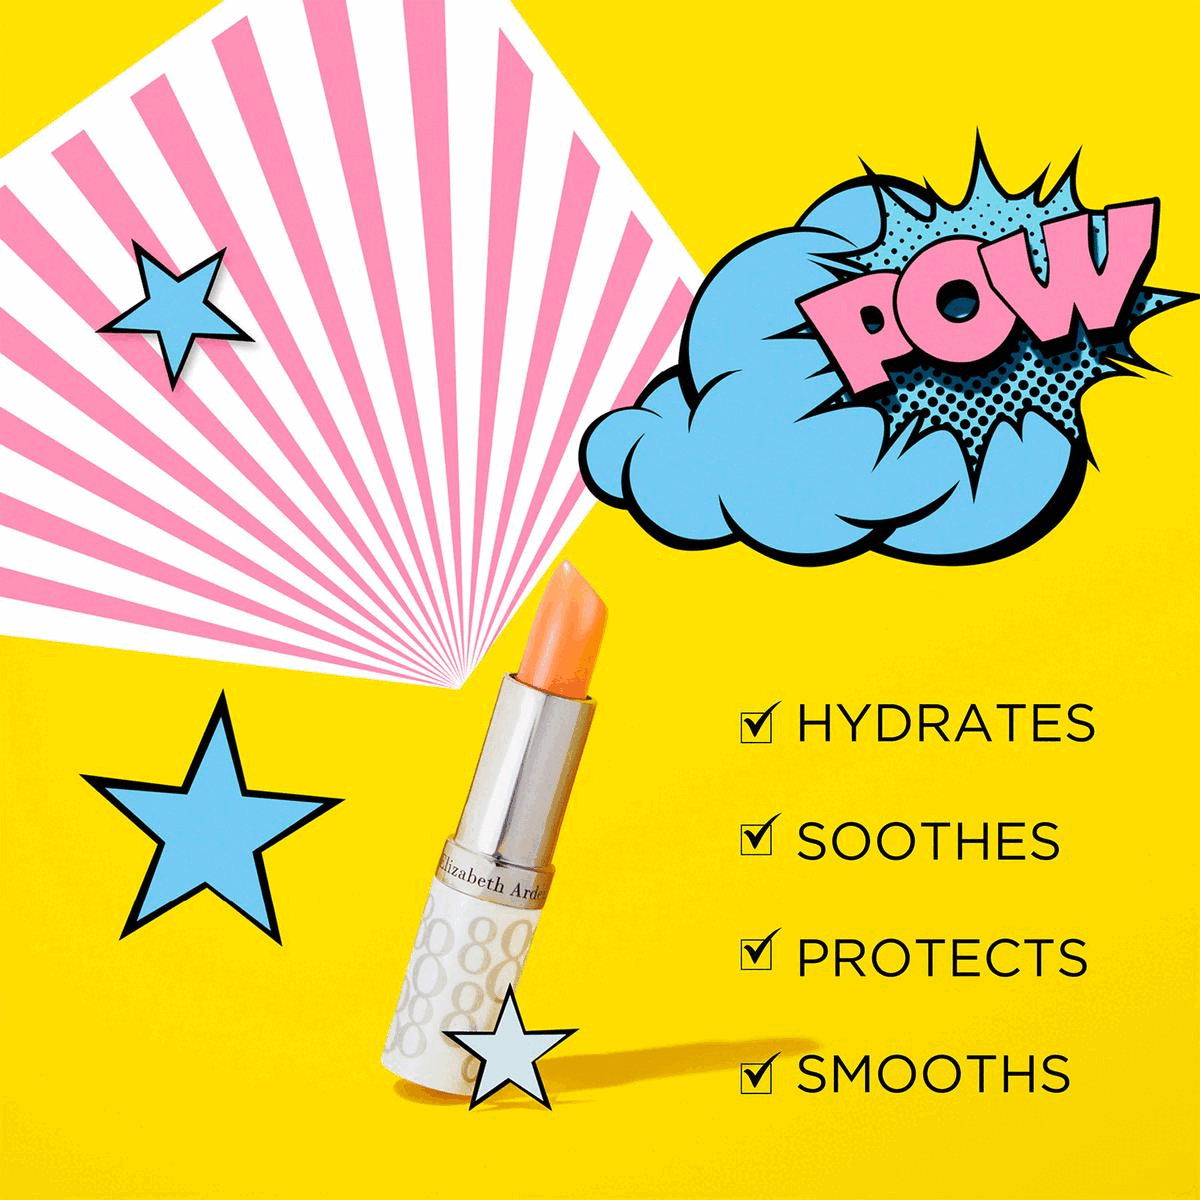 Image 1: Hydrates, Soothes, Protects, Smooths Image 2: Rescue Dry Lips, On Demand Moisture For Ultra-Nourished Lips Image 3: Many Shades Of Moisture 
            